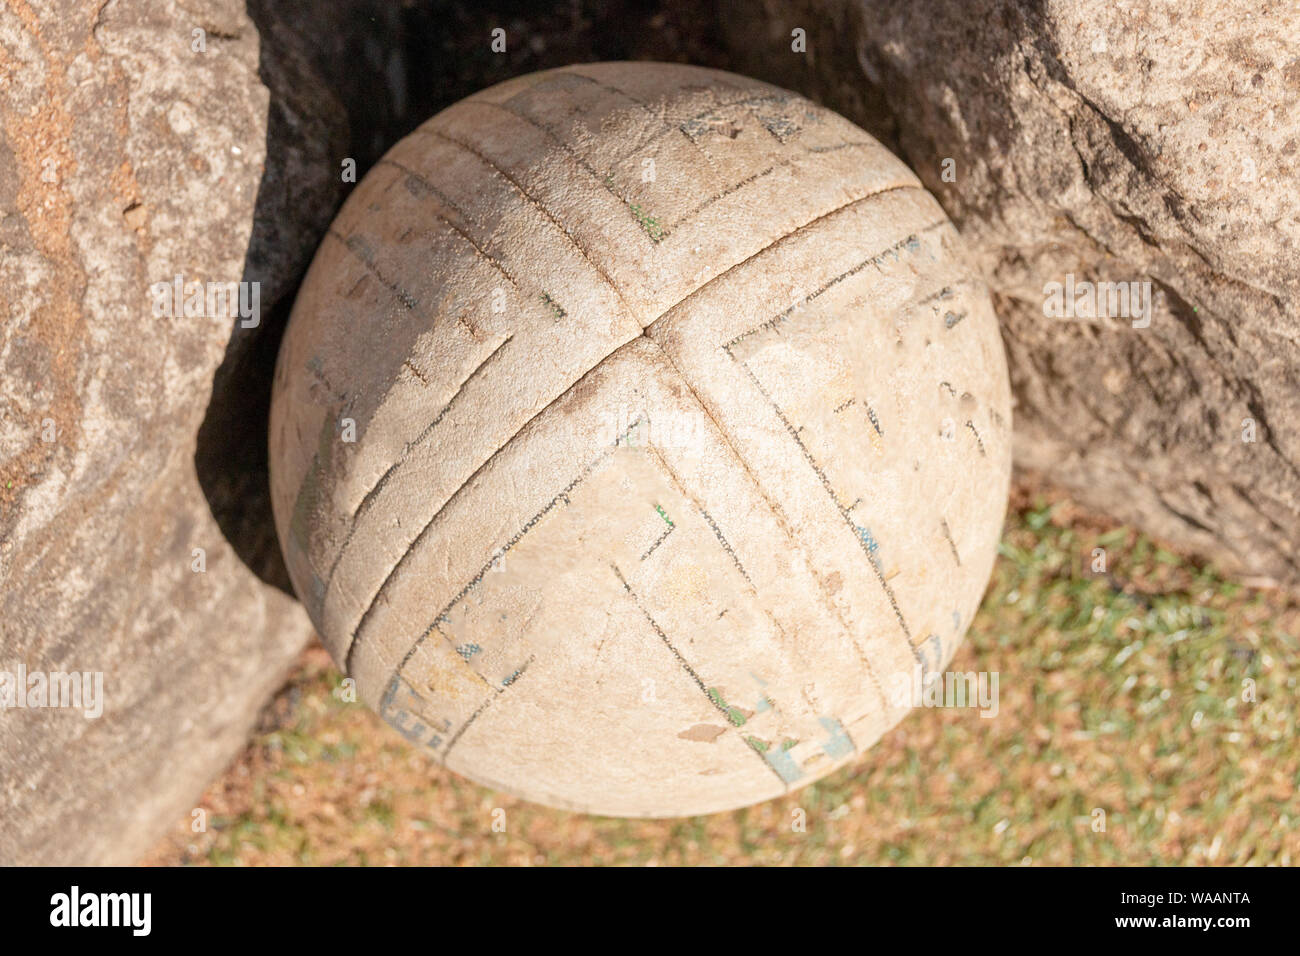 A close up top view of rugby ball on a green grass background Stock Photo